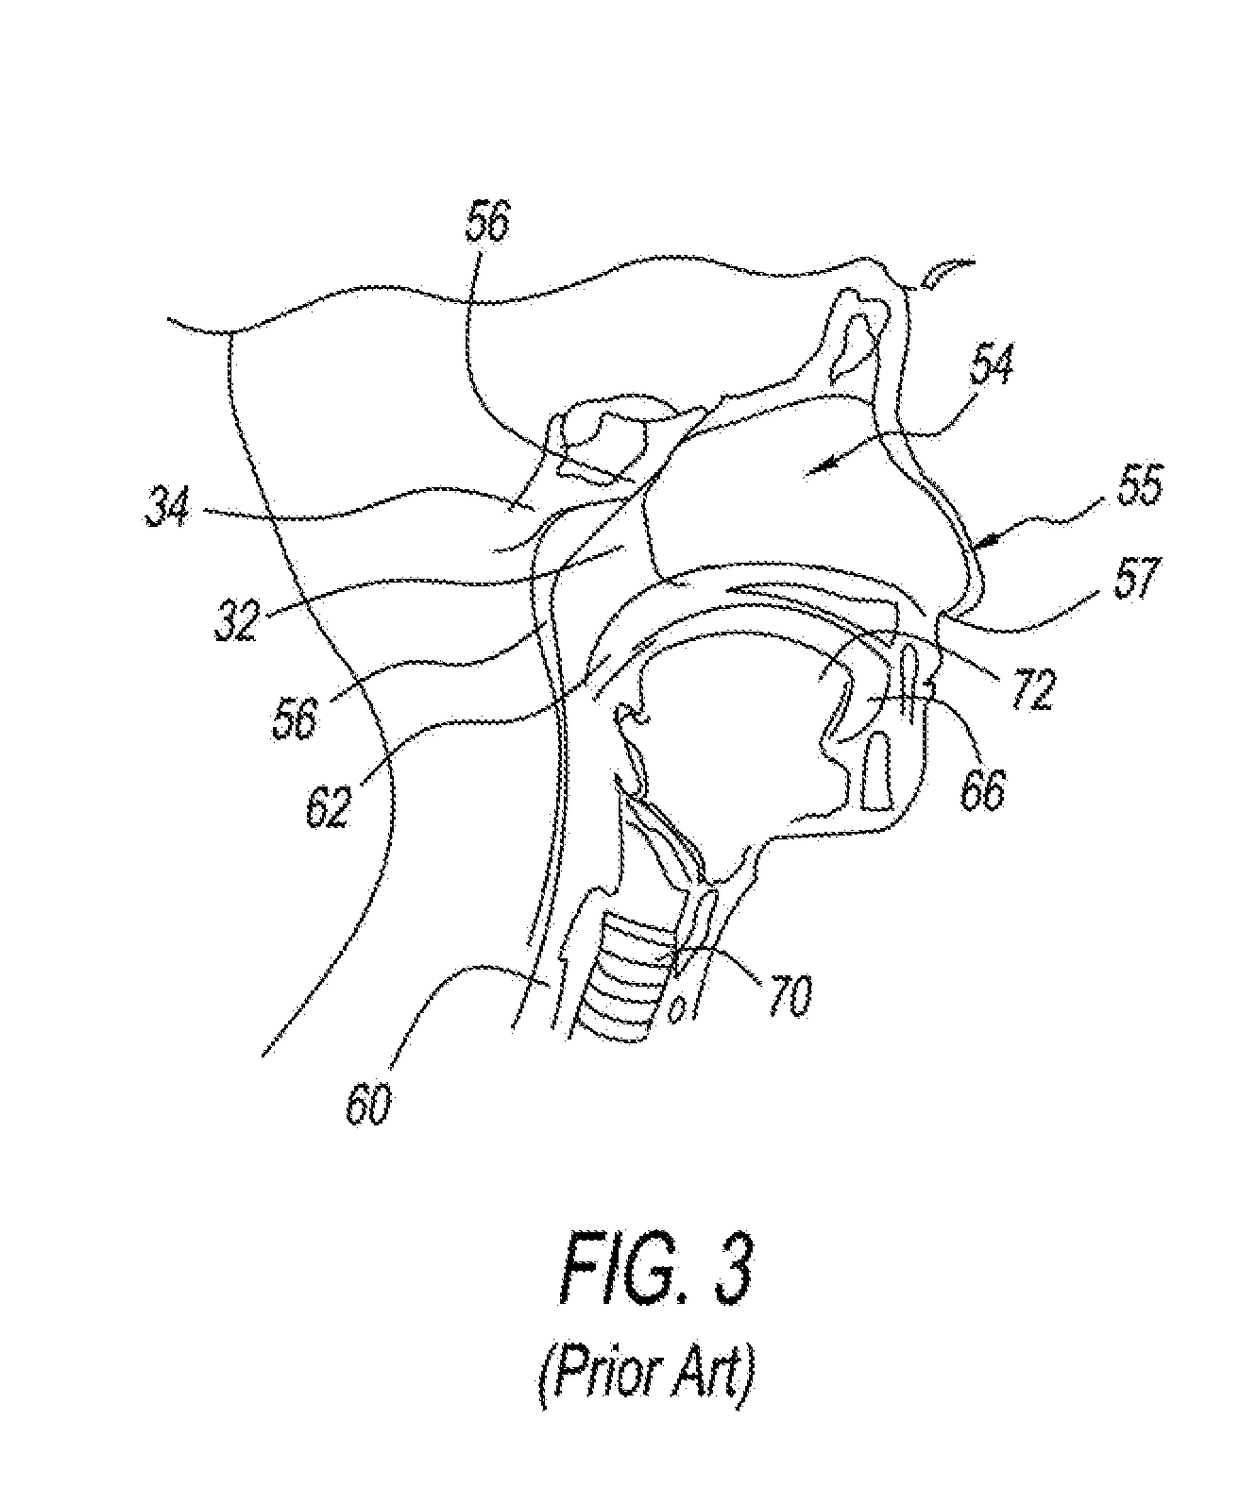 Method and apparatus for treating a malformed eustachian tube